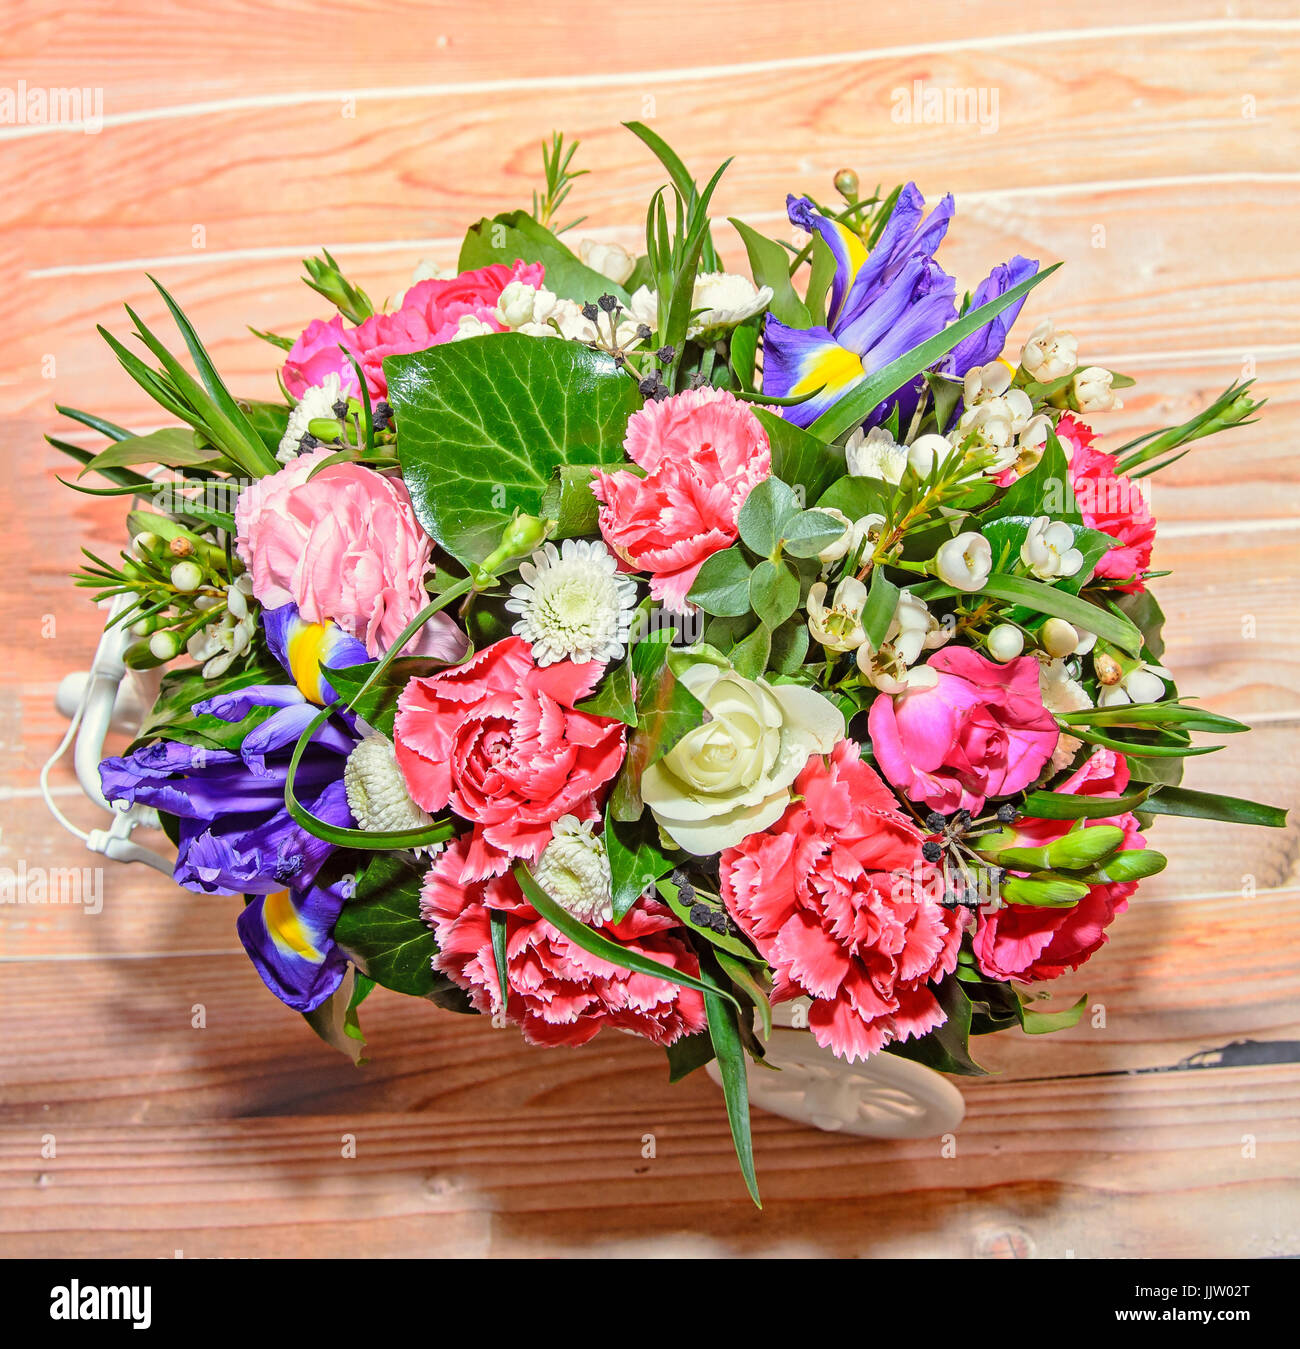 image background colorful multicolored small artificial flowers in a basket  Stock Photo - Alamy